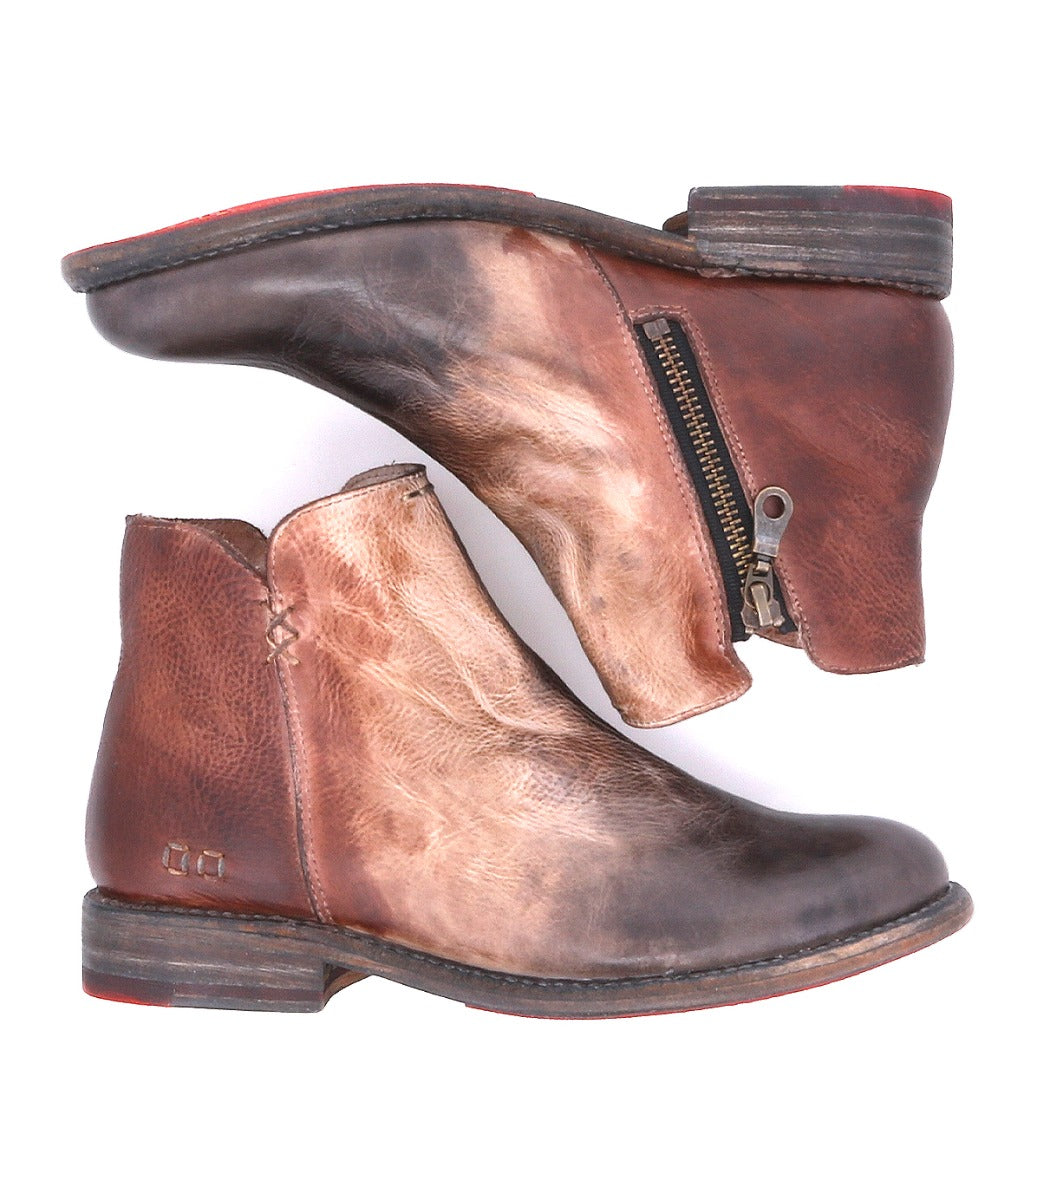 A pair of women's Bed Stu Yurisa brown leather ankle boots.